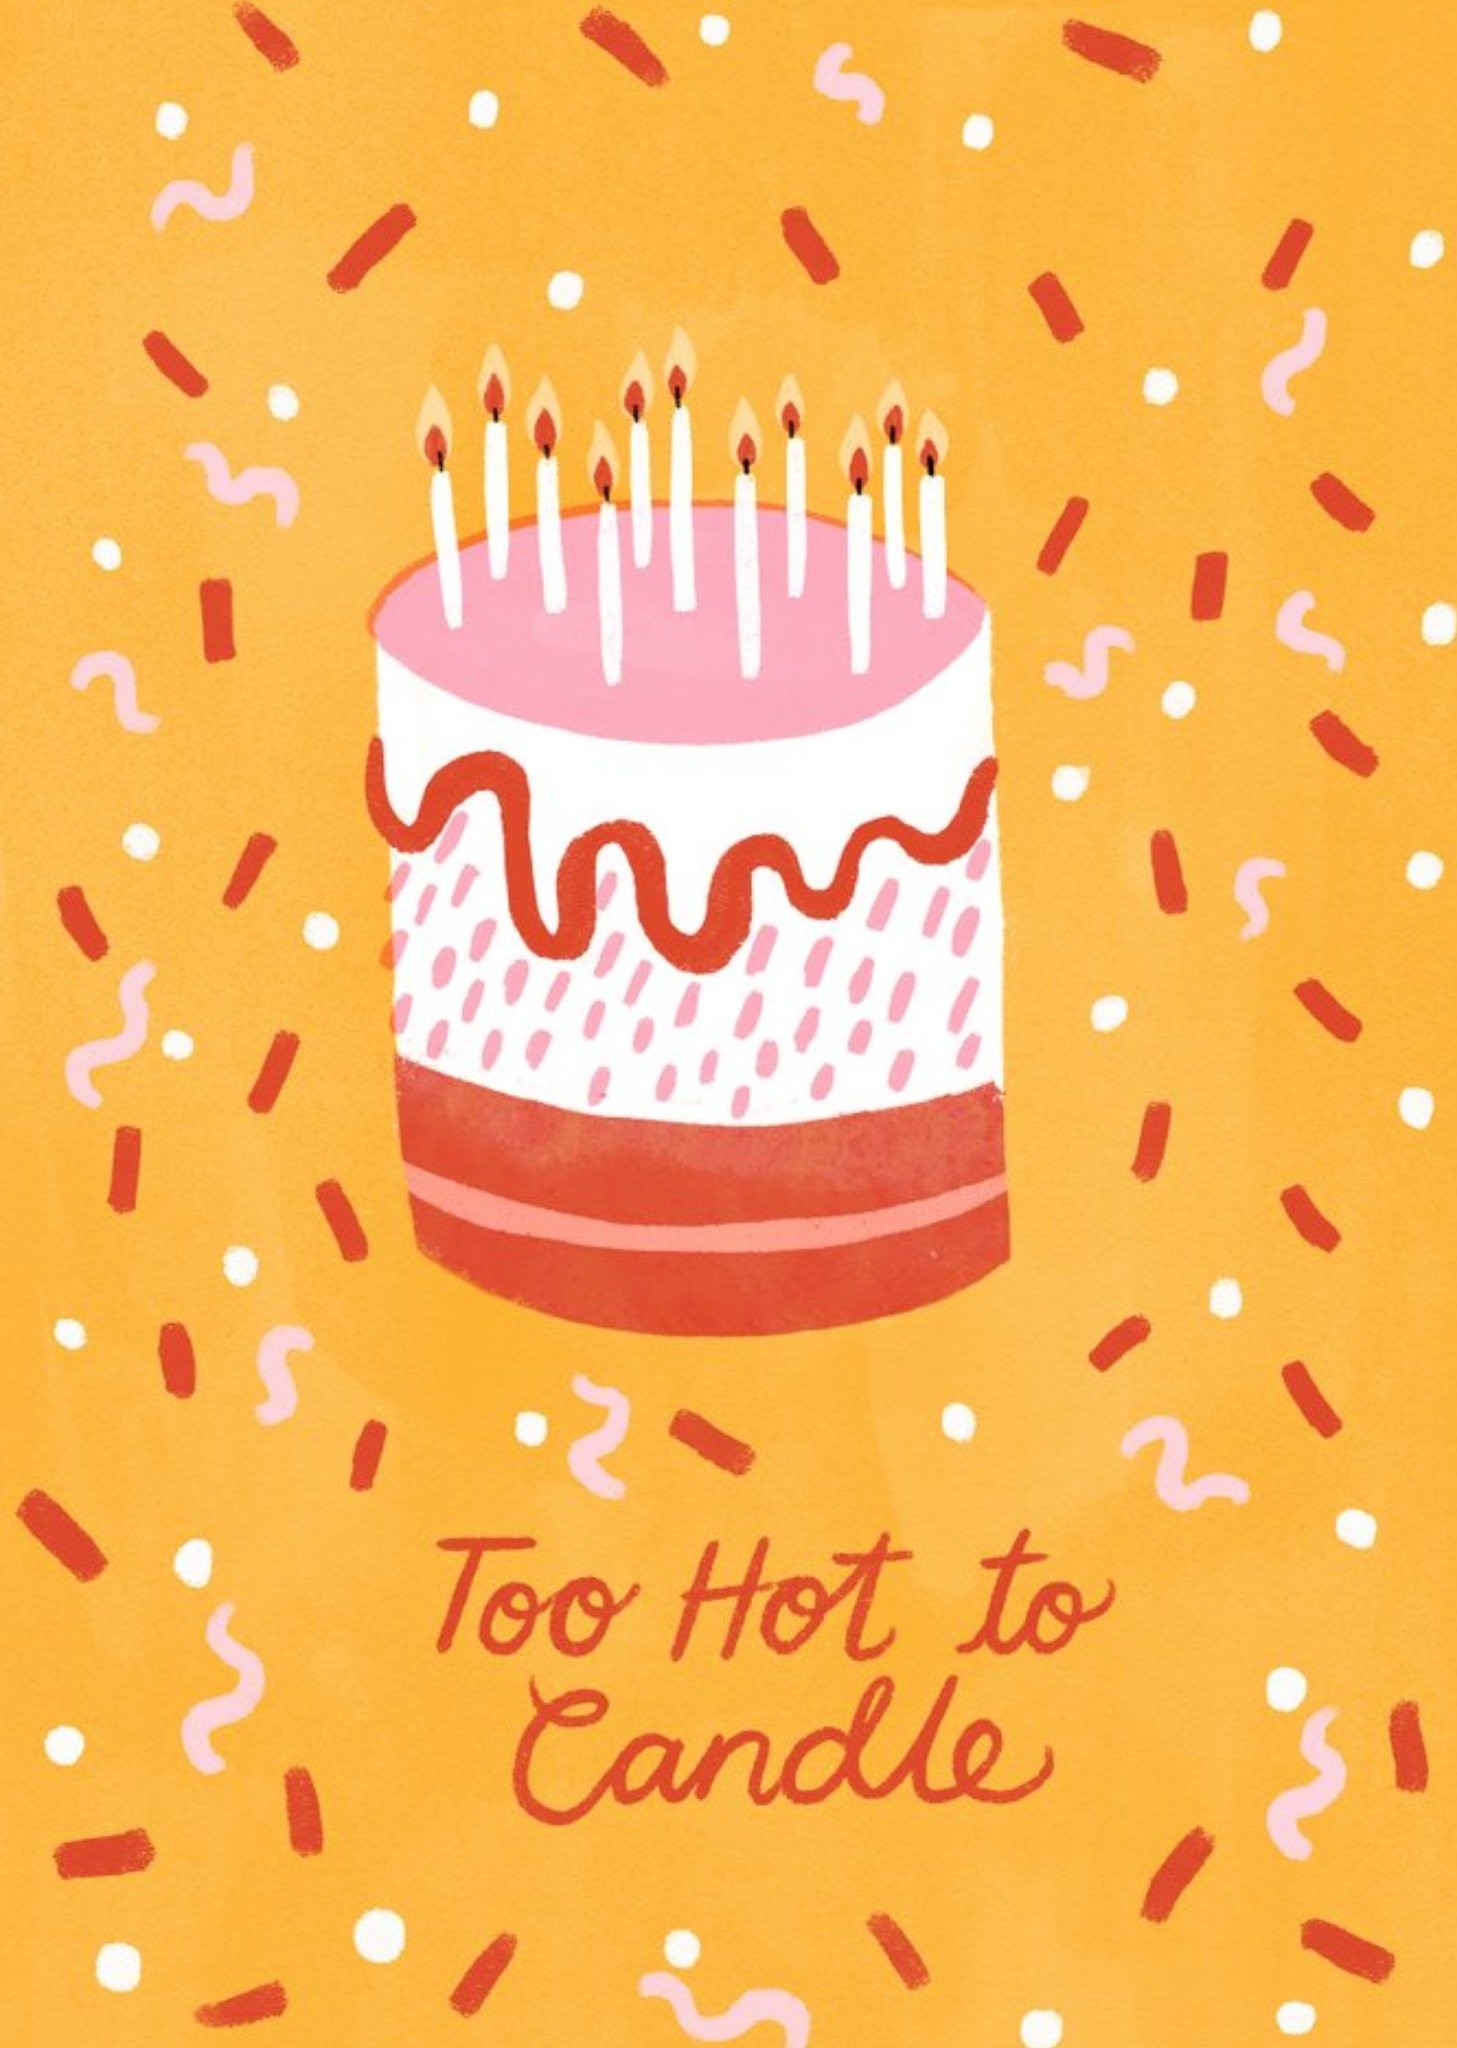 Cardy Club Pun Too Hot To Candle Cake Birthday Card, Large